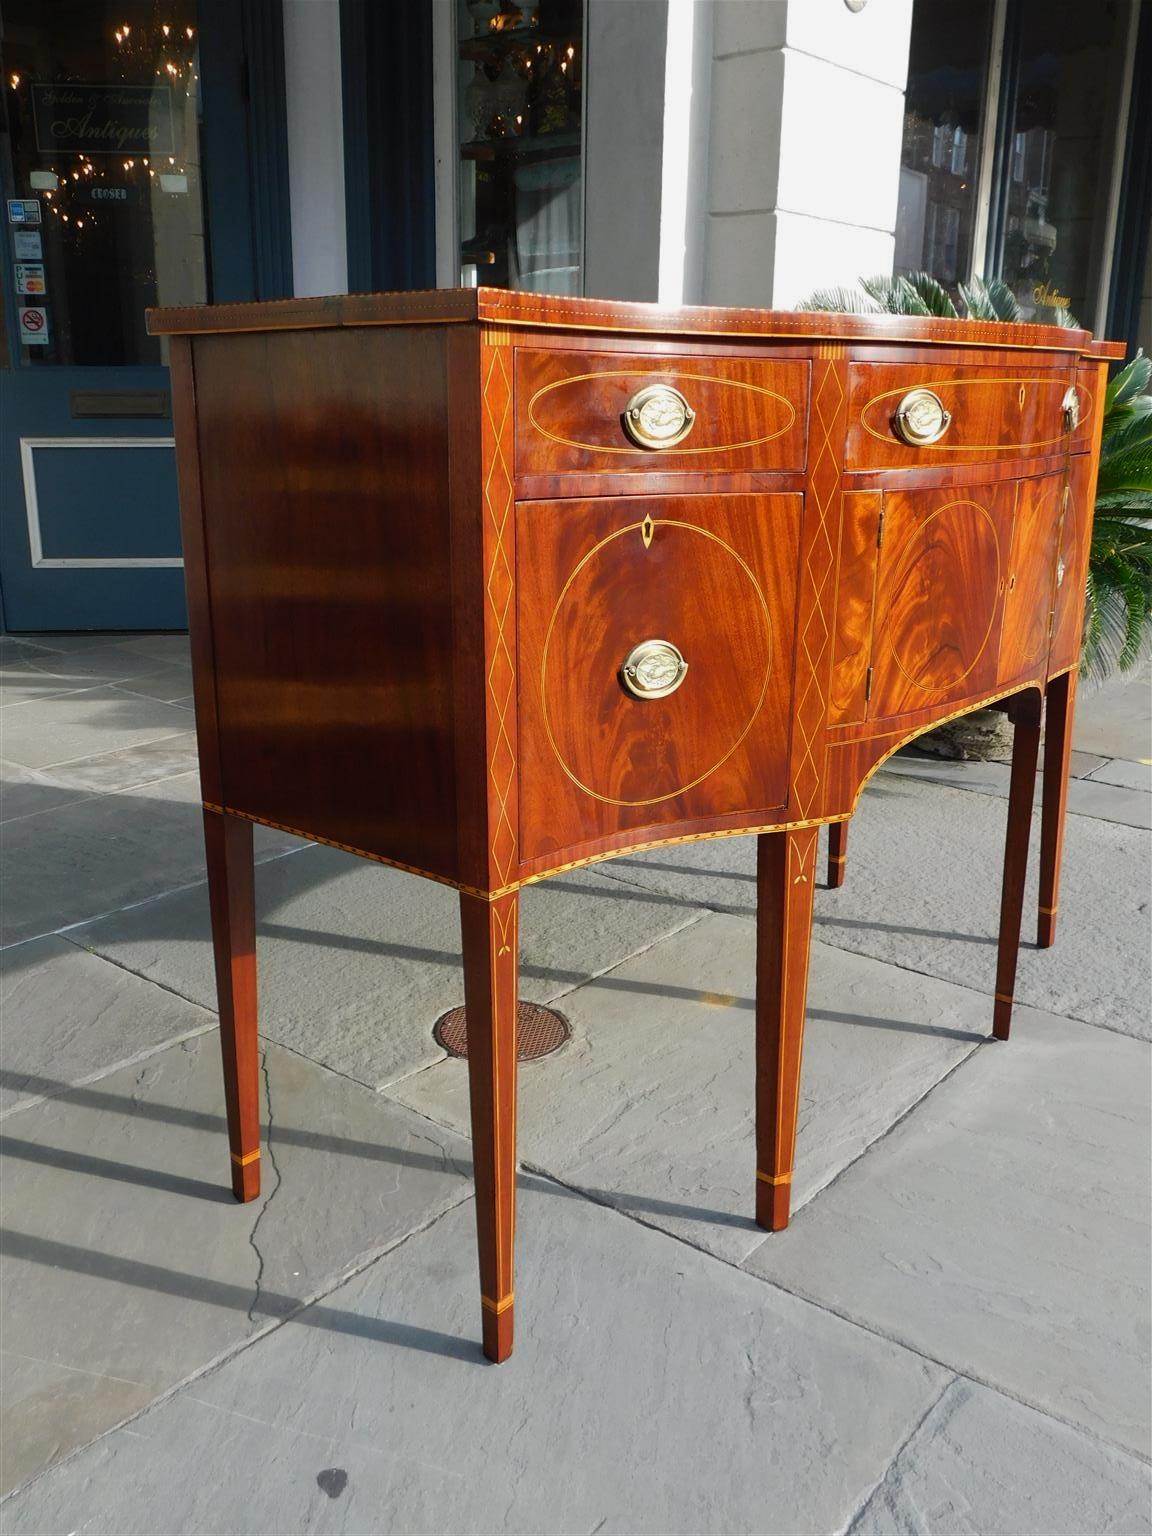 Hand-Crafted American Hepplewhite Mahogany Serpentine Satinwood Inlaid Sideboard, NY C. 1780 For Sale